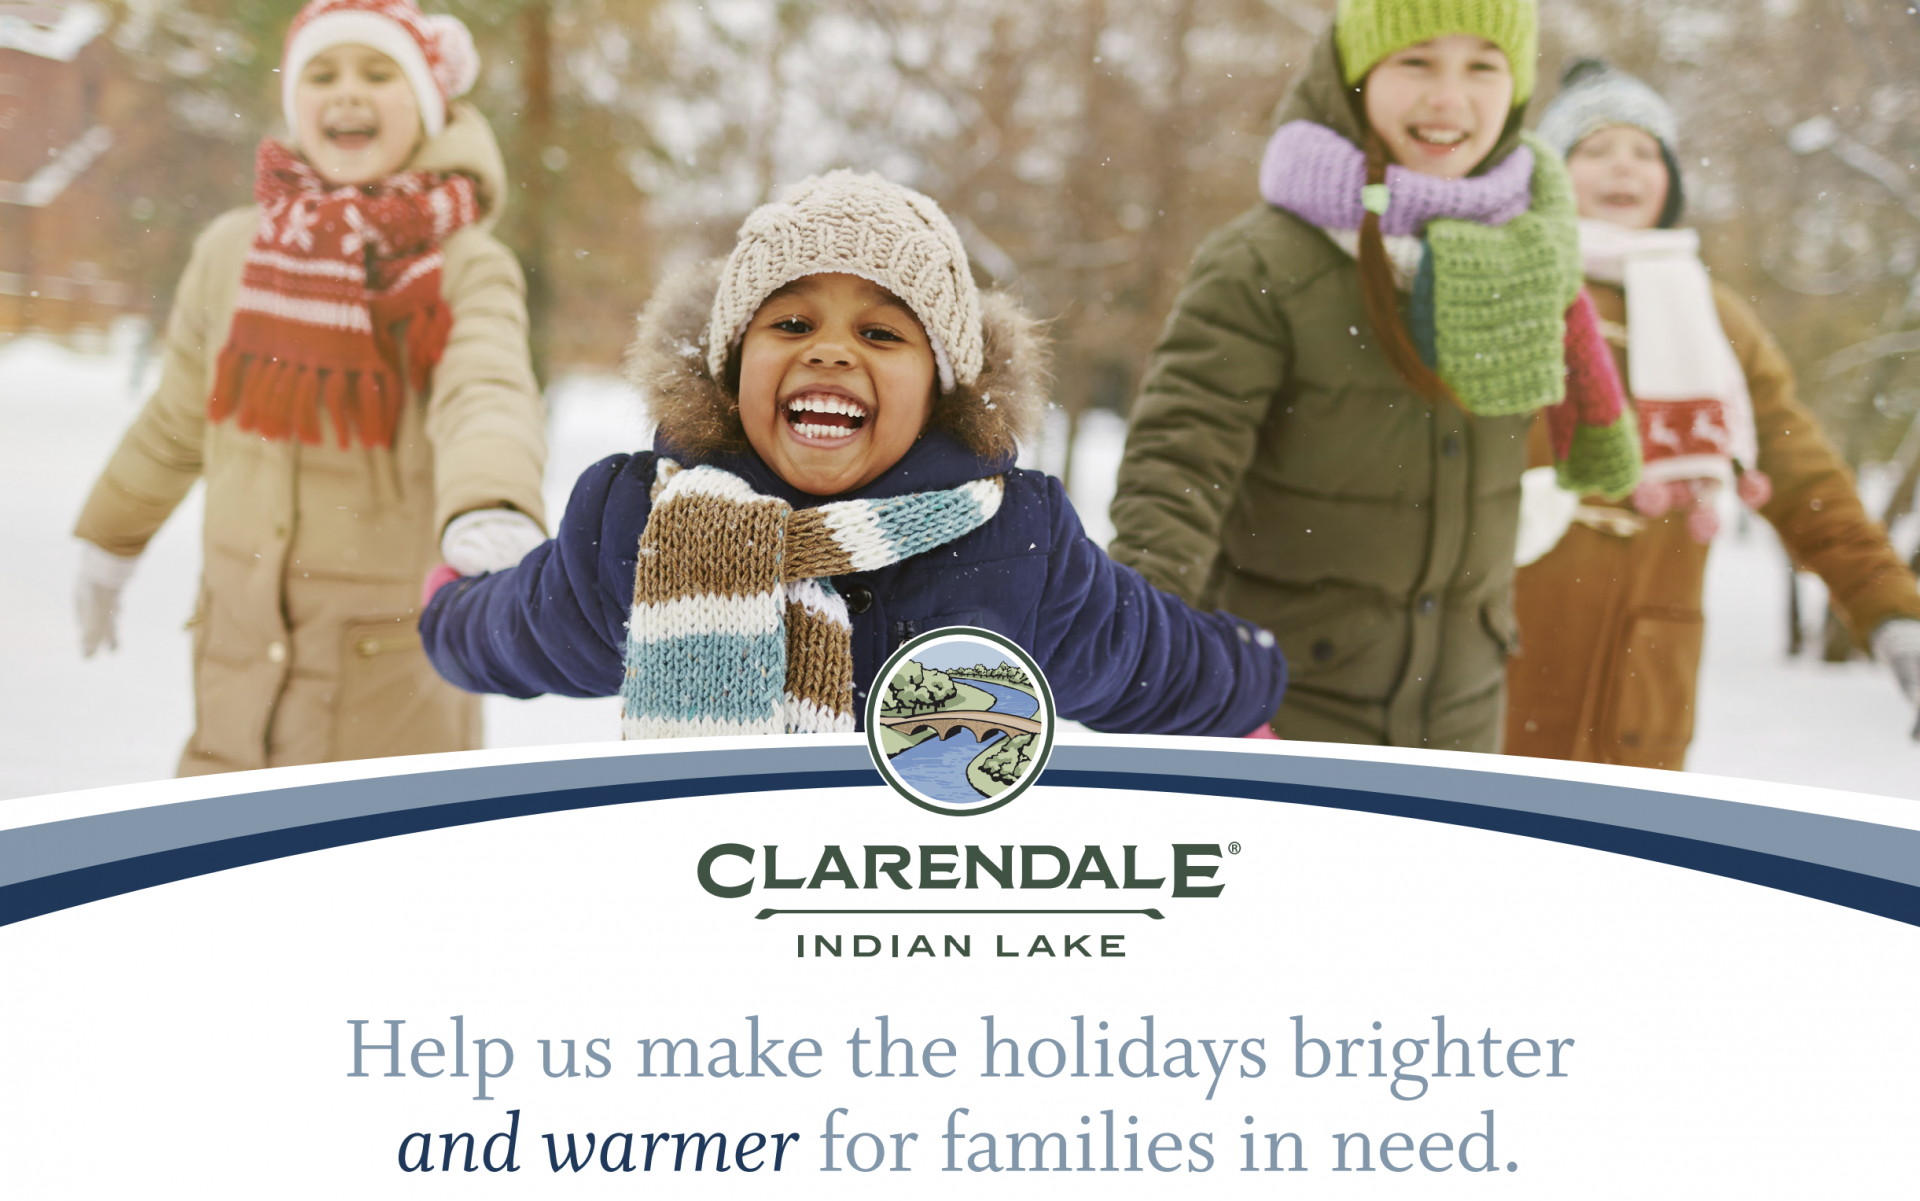 Clarendale at Indian lake: Help us make the holidays brighter and warmer for families in need